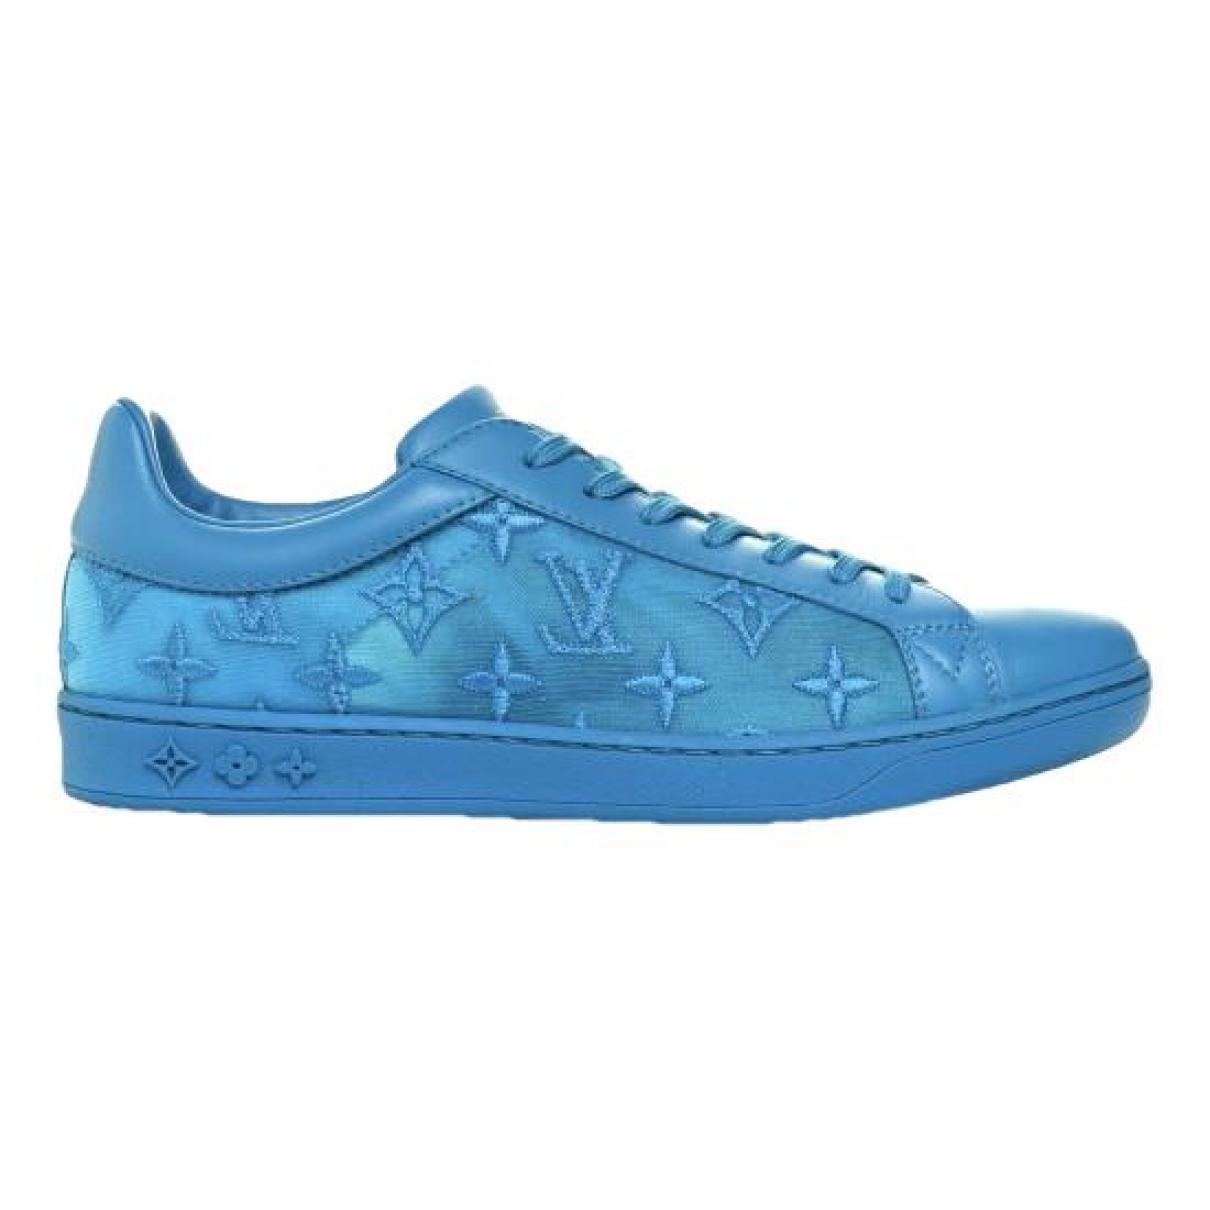 Luxembourg leather low trainers Louis Vuitton Blue size 7.5 UK in